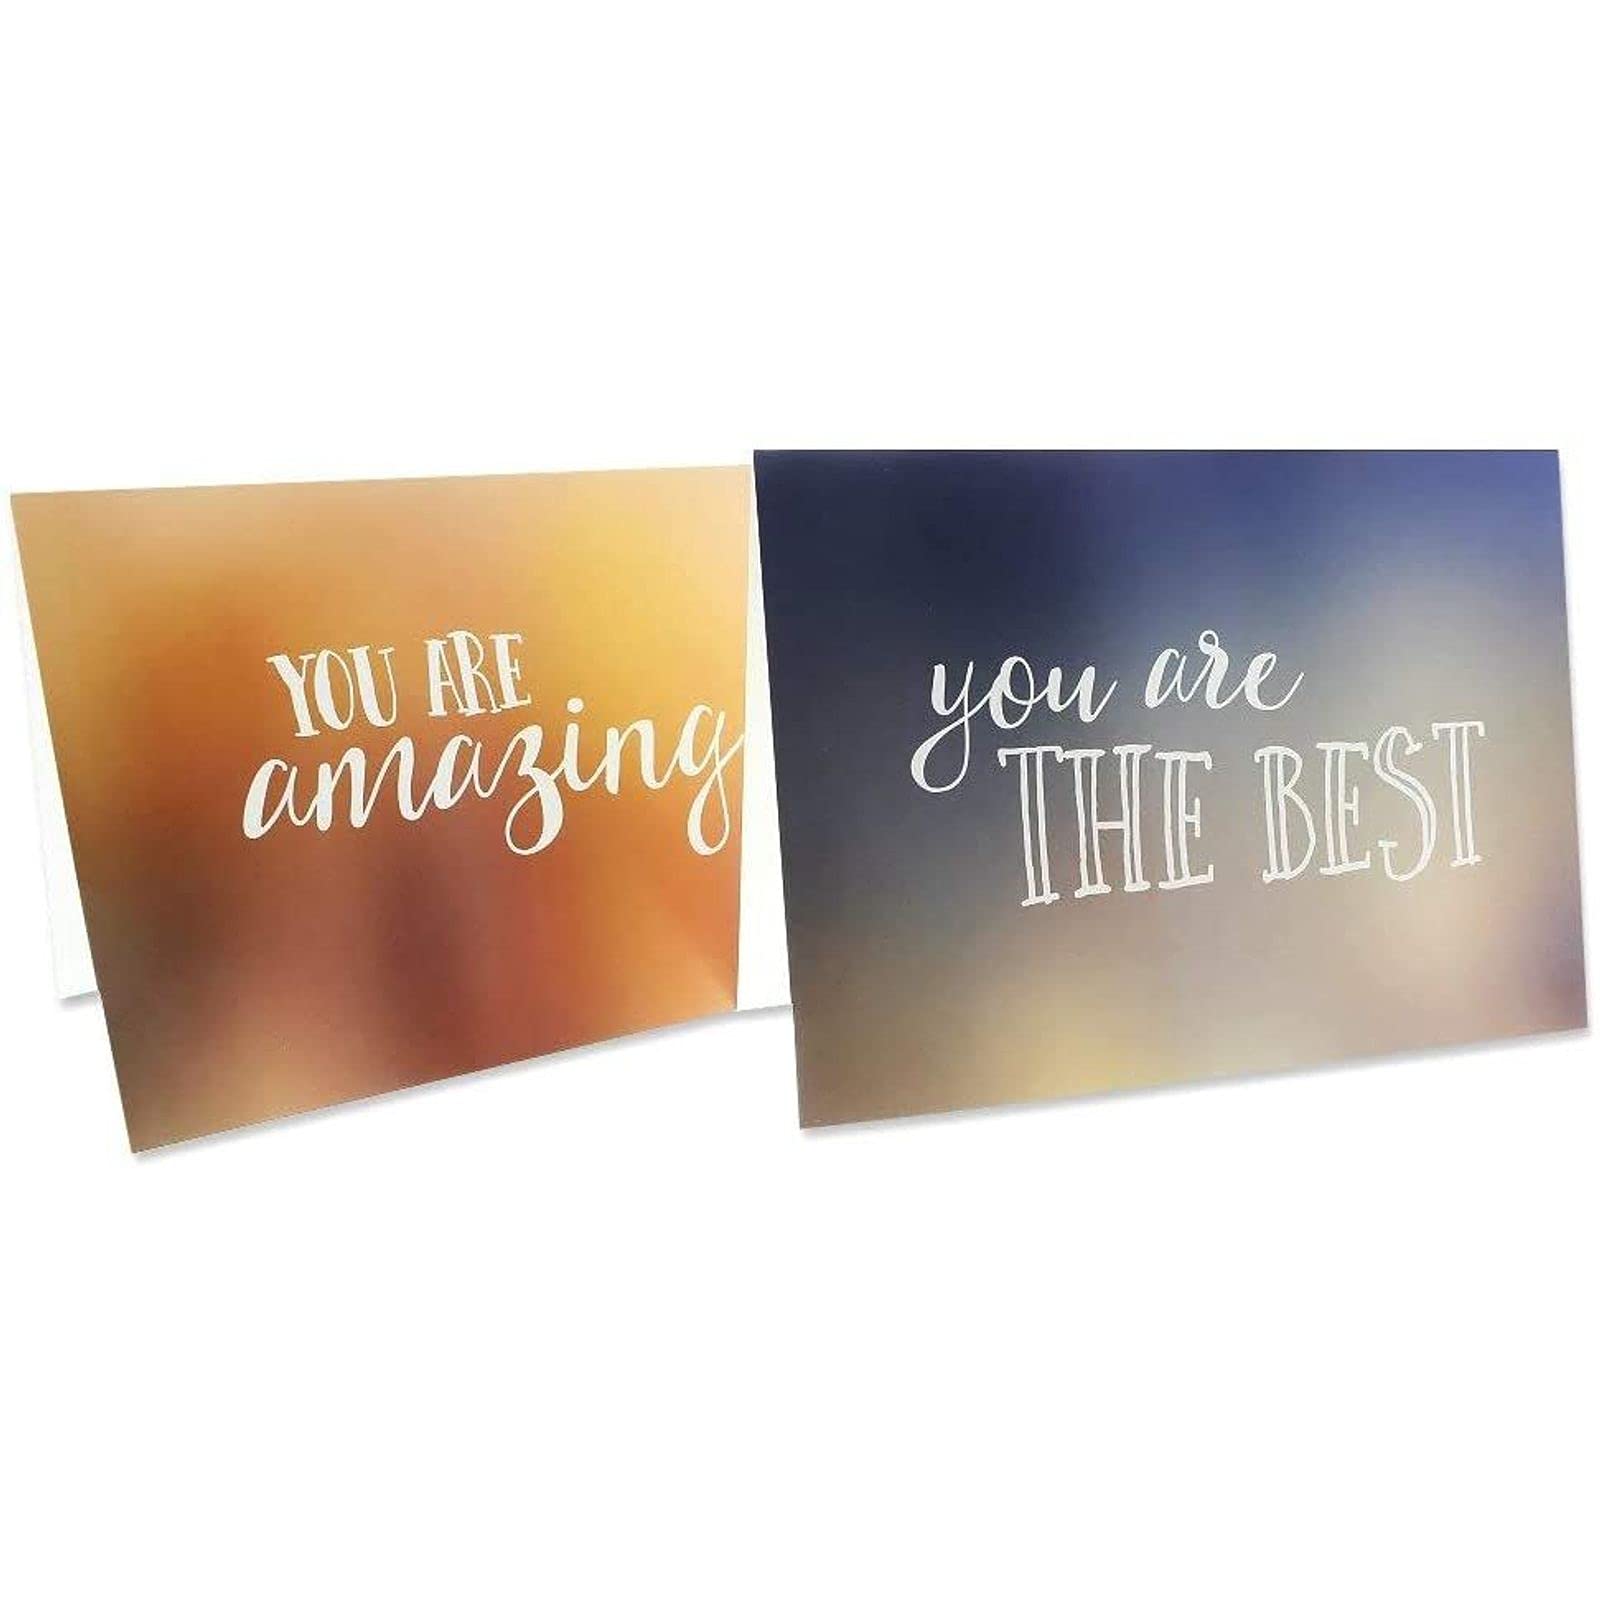 36 Pack Blank A7 Encouragement Greeting Cards with Envelopes, Inspirational 5x7 Note Cards with Motivational Quotes, 6 Designs